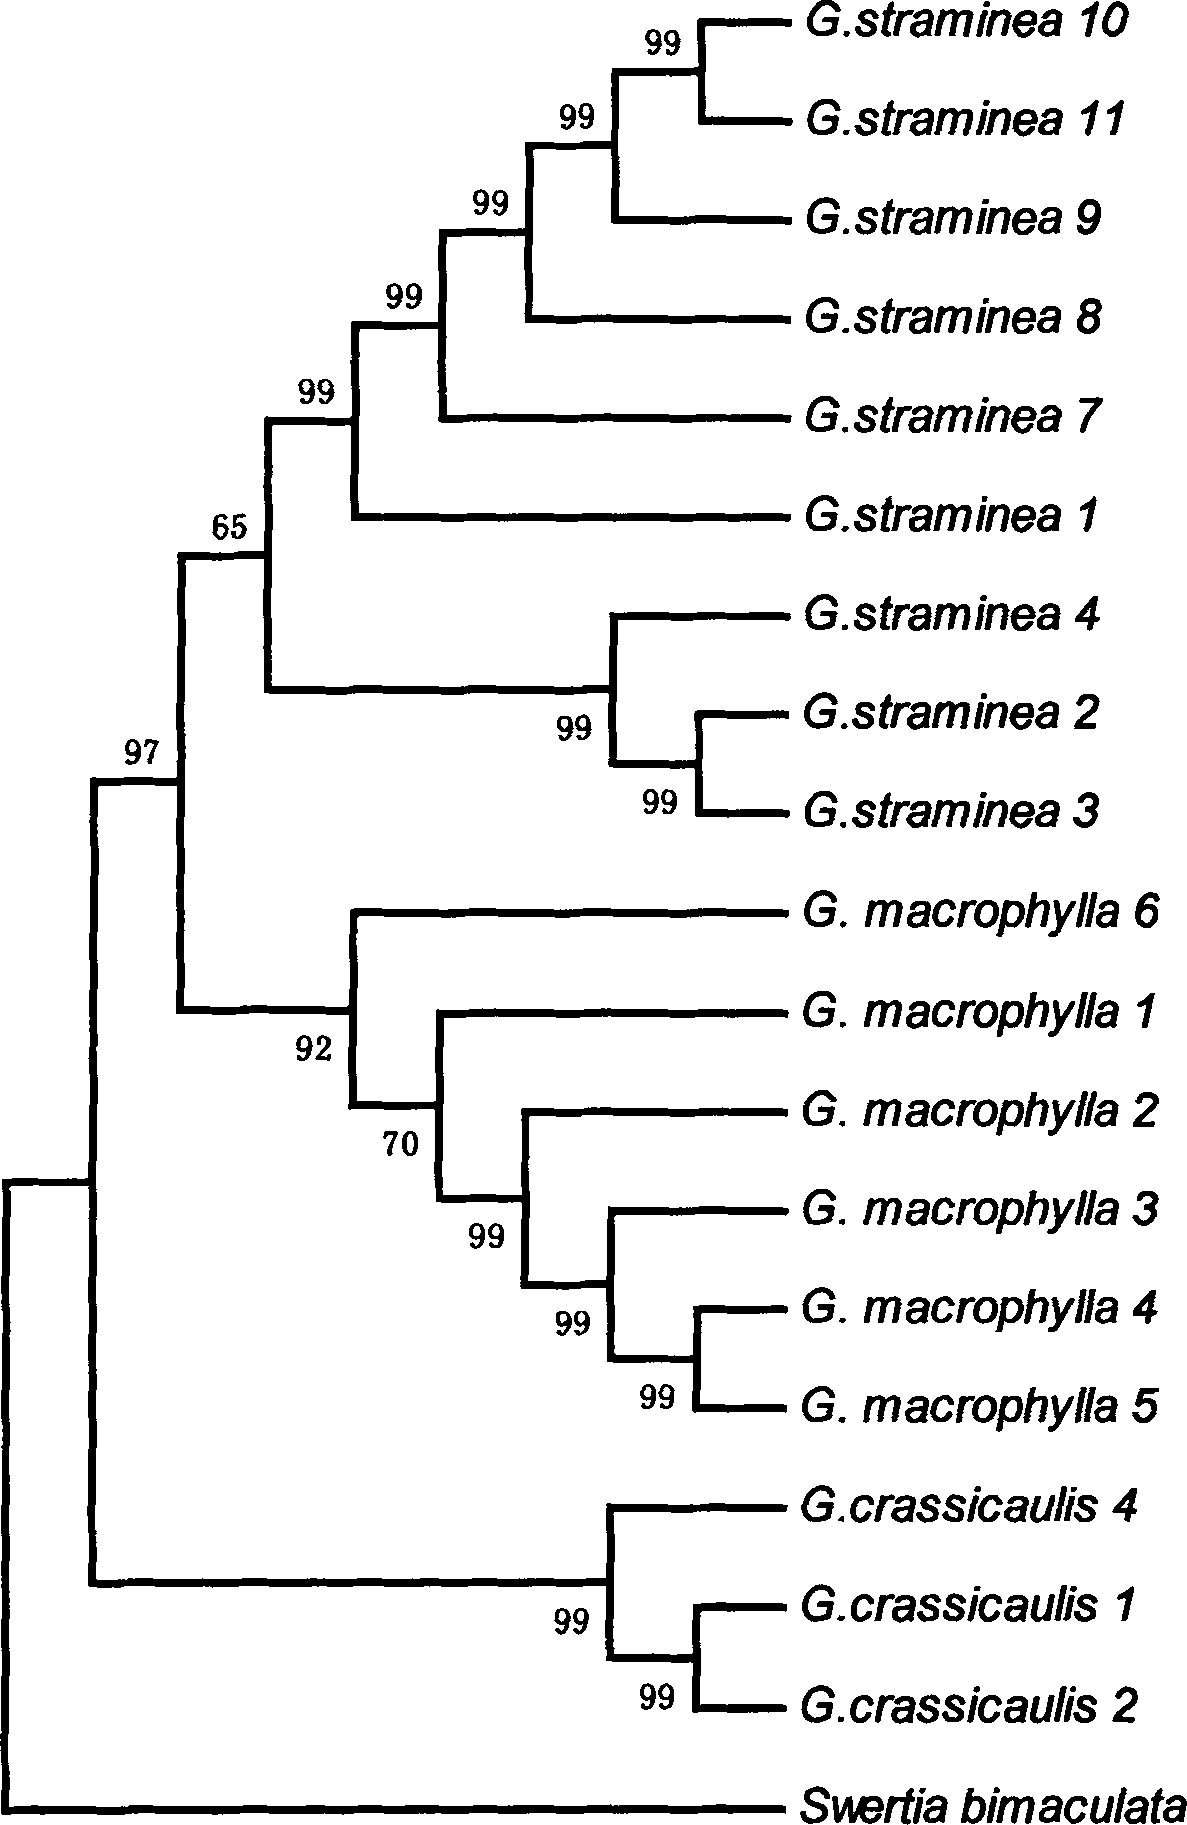 Method for identifying DNA barcodes of three gentiana macrophylla medicinal materials in pharmacopeia